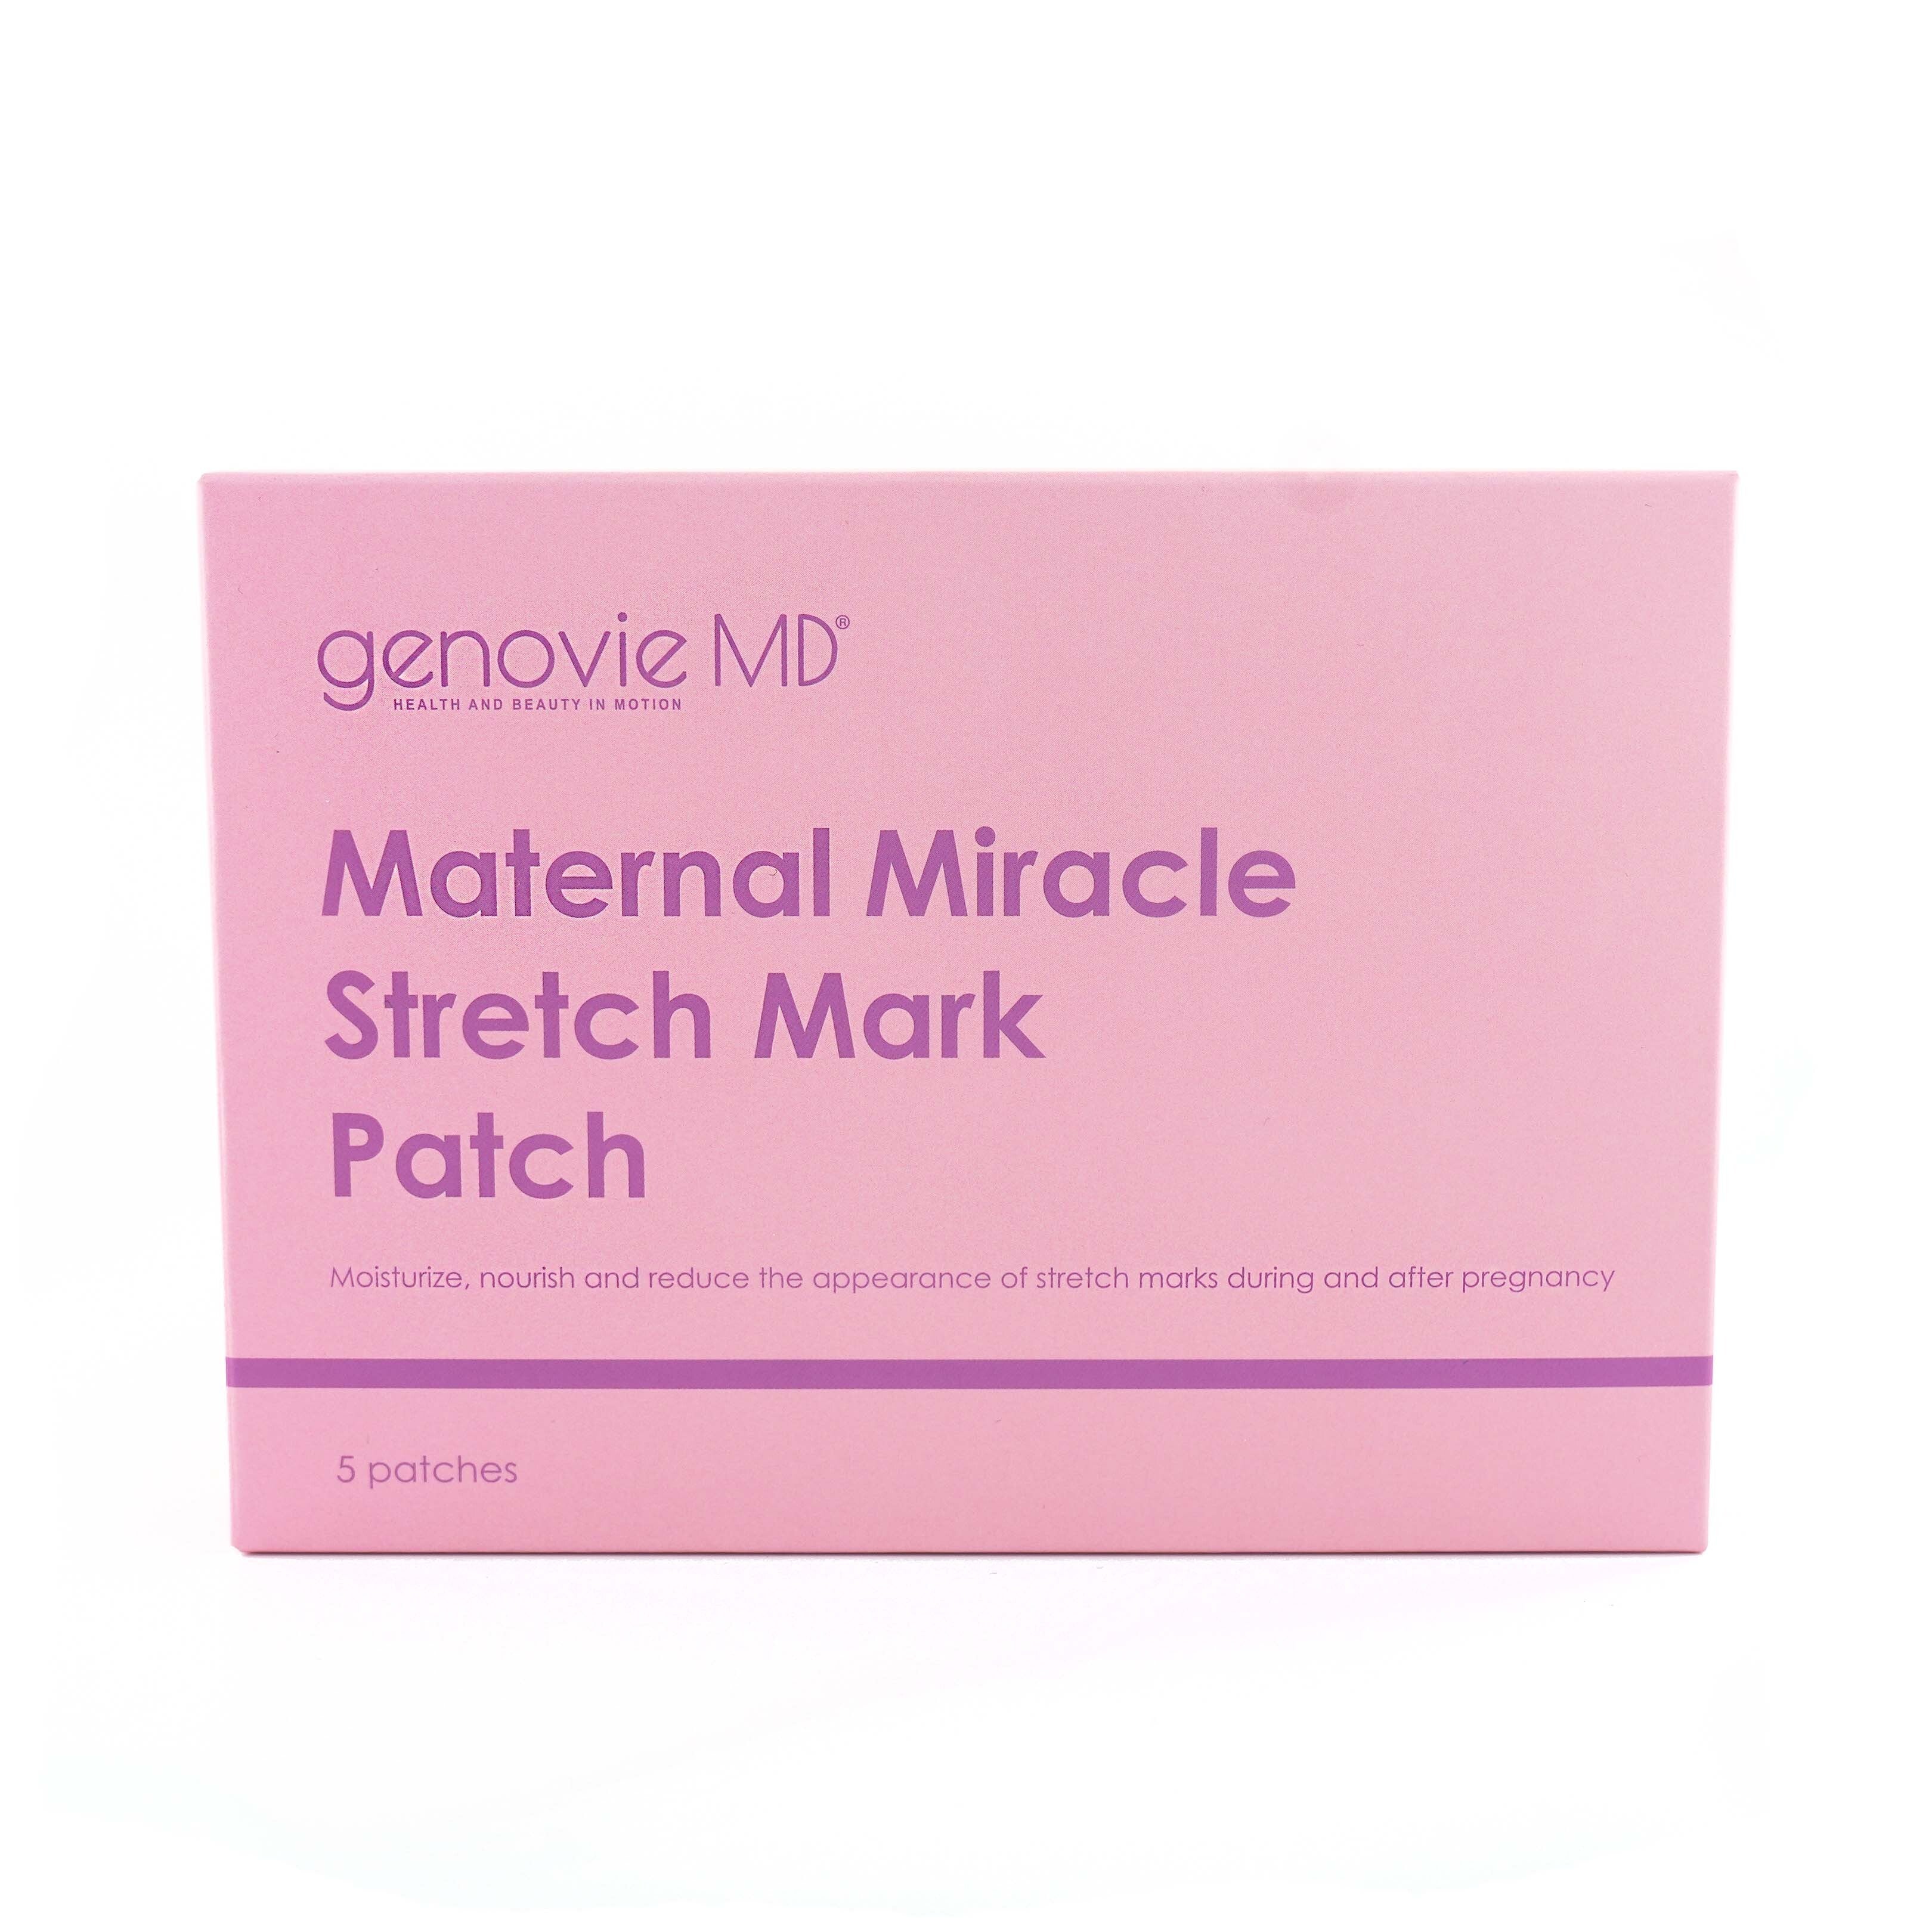 Maternal Miracle Stretch Mark Patch